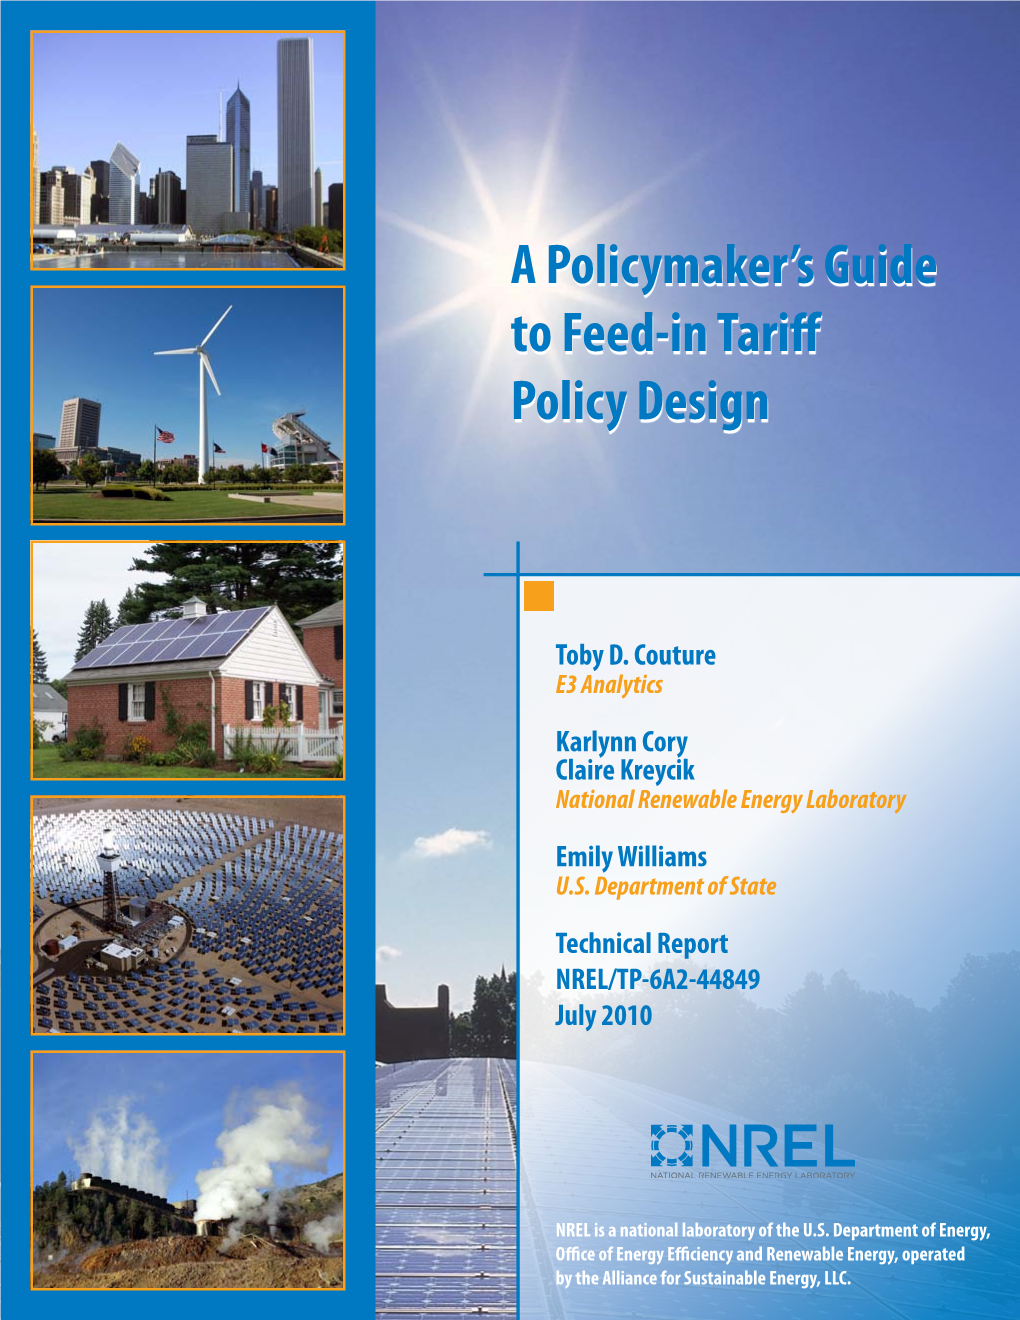 A Policymaker's Guide to Feed-In Tariff Policy Design DE-AC36-08-GO28308